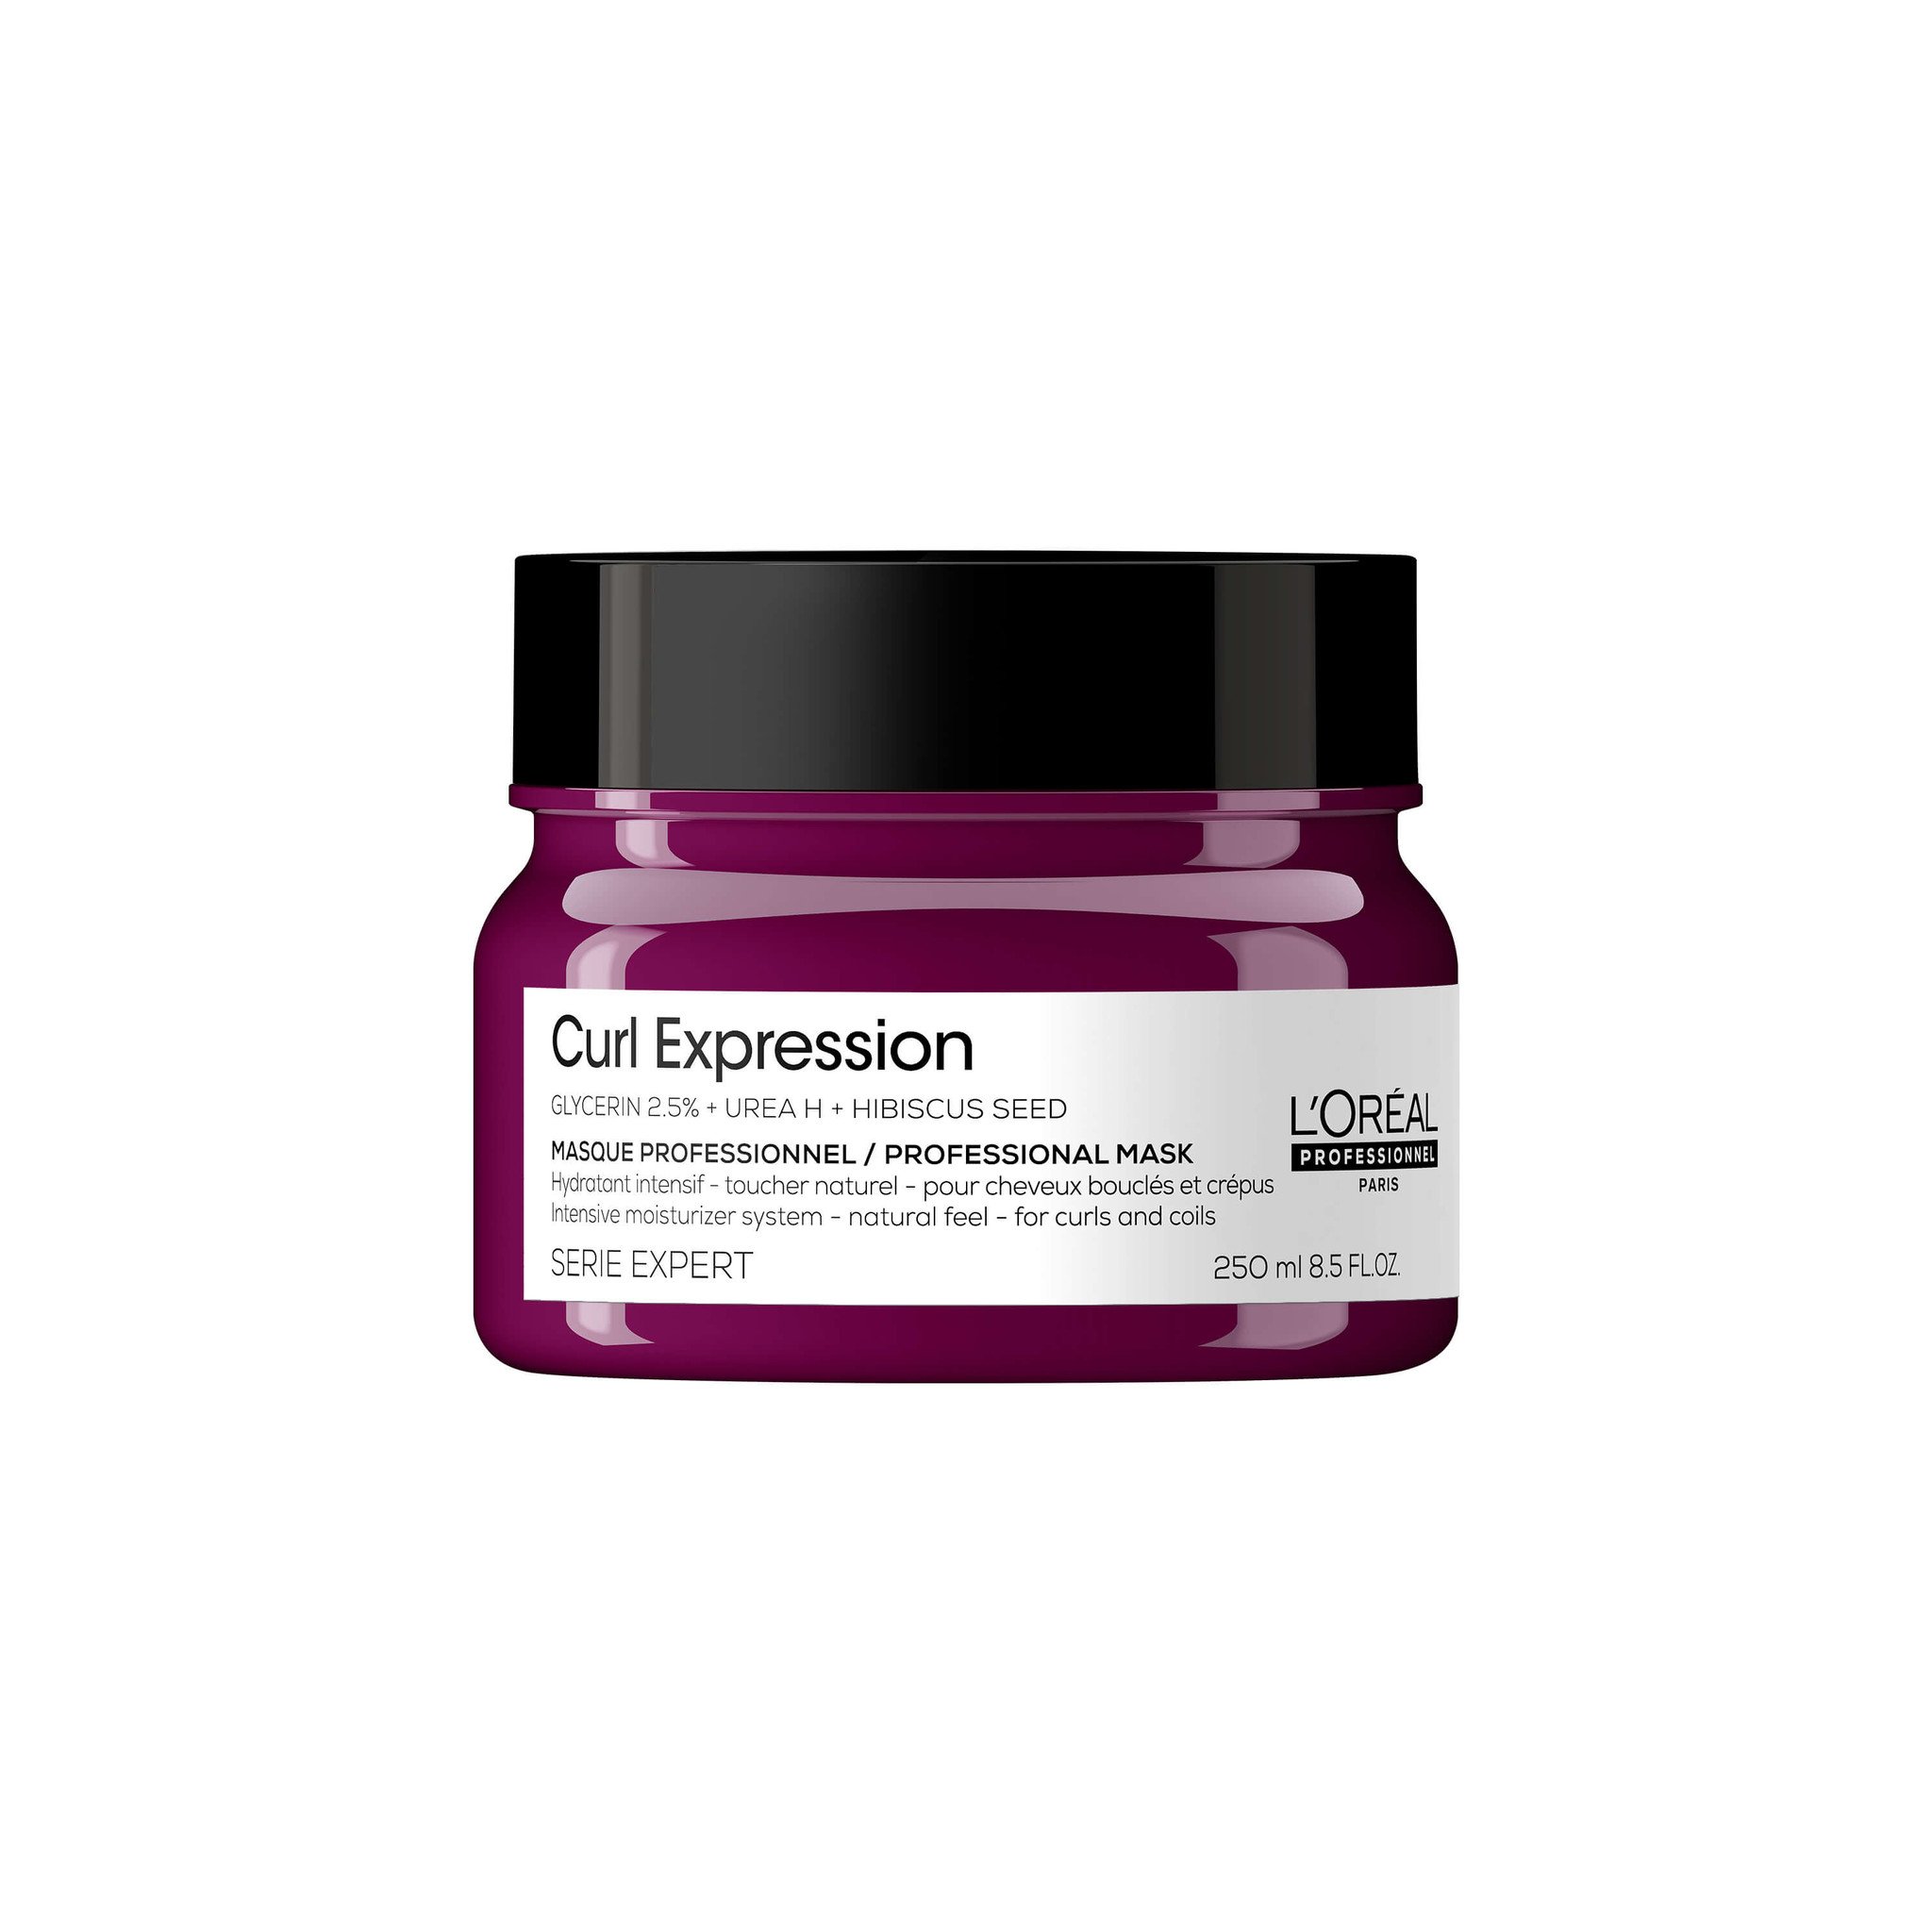 SERIE EXPERT | CURL EXPRESSION Mask